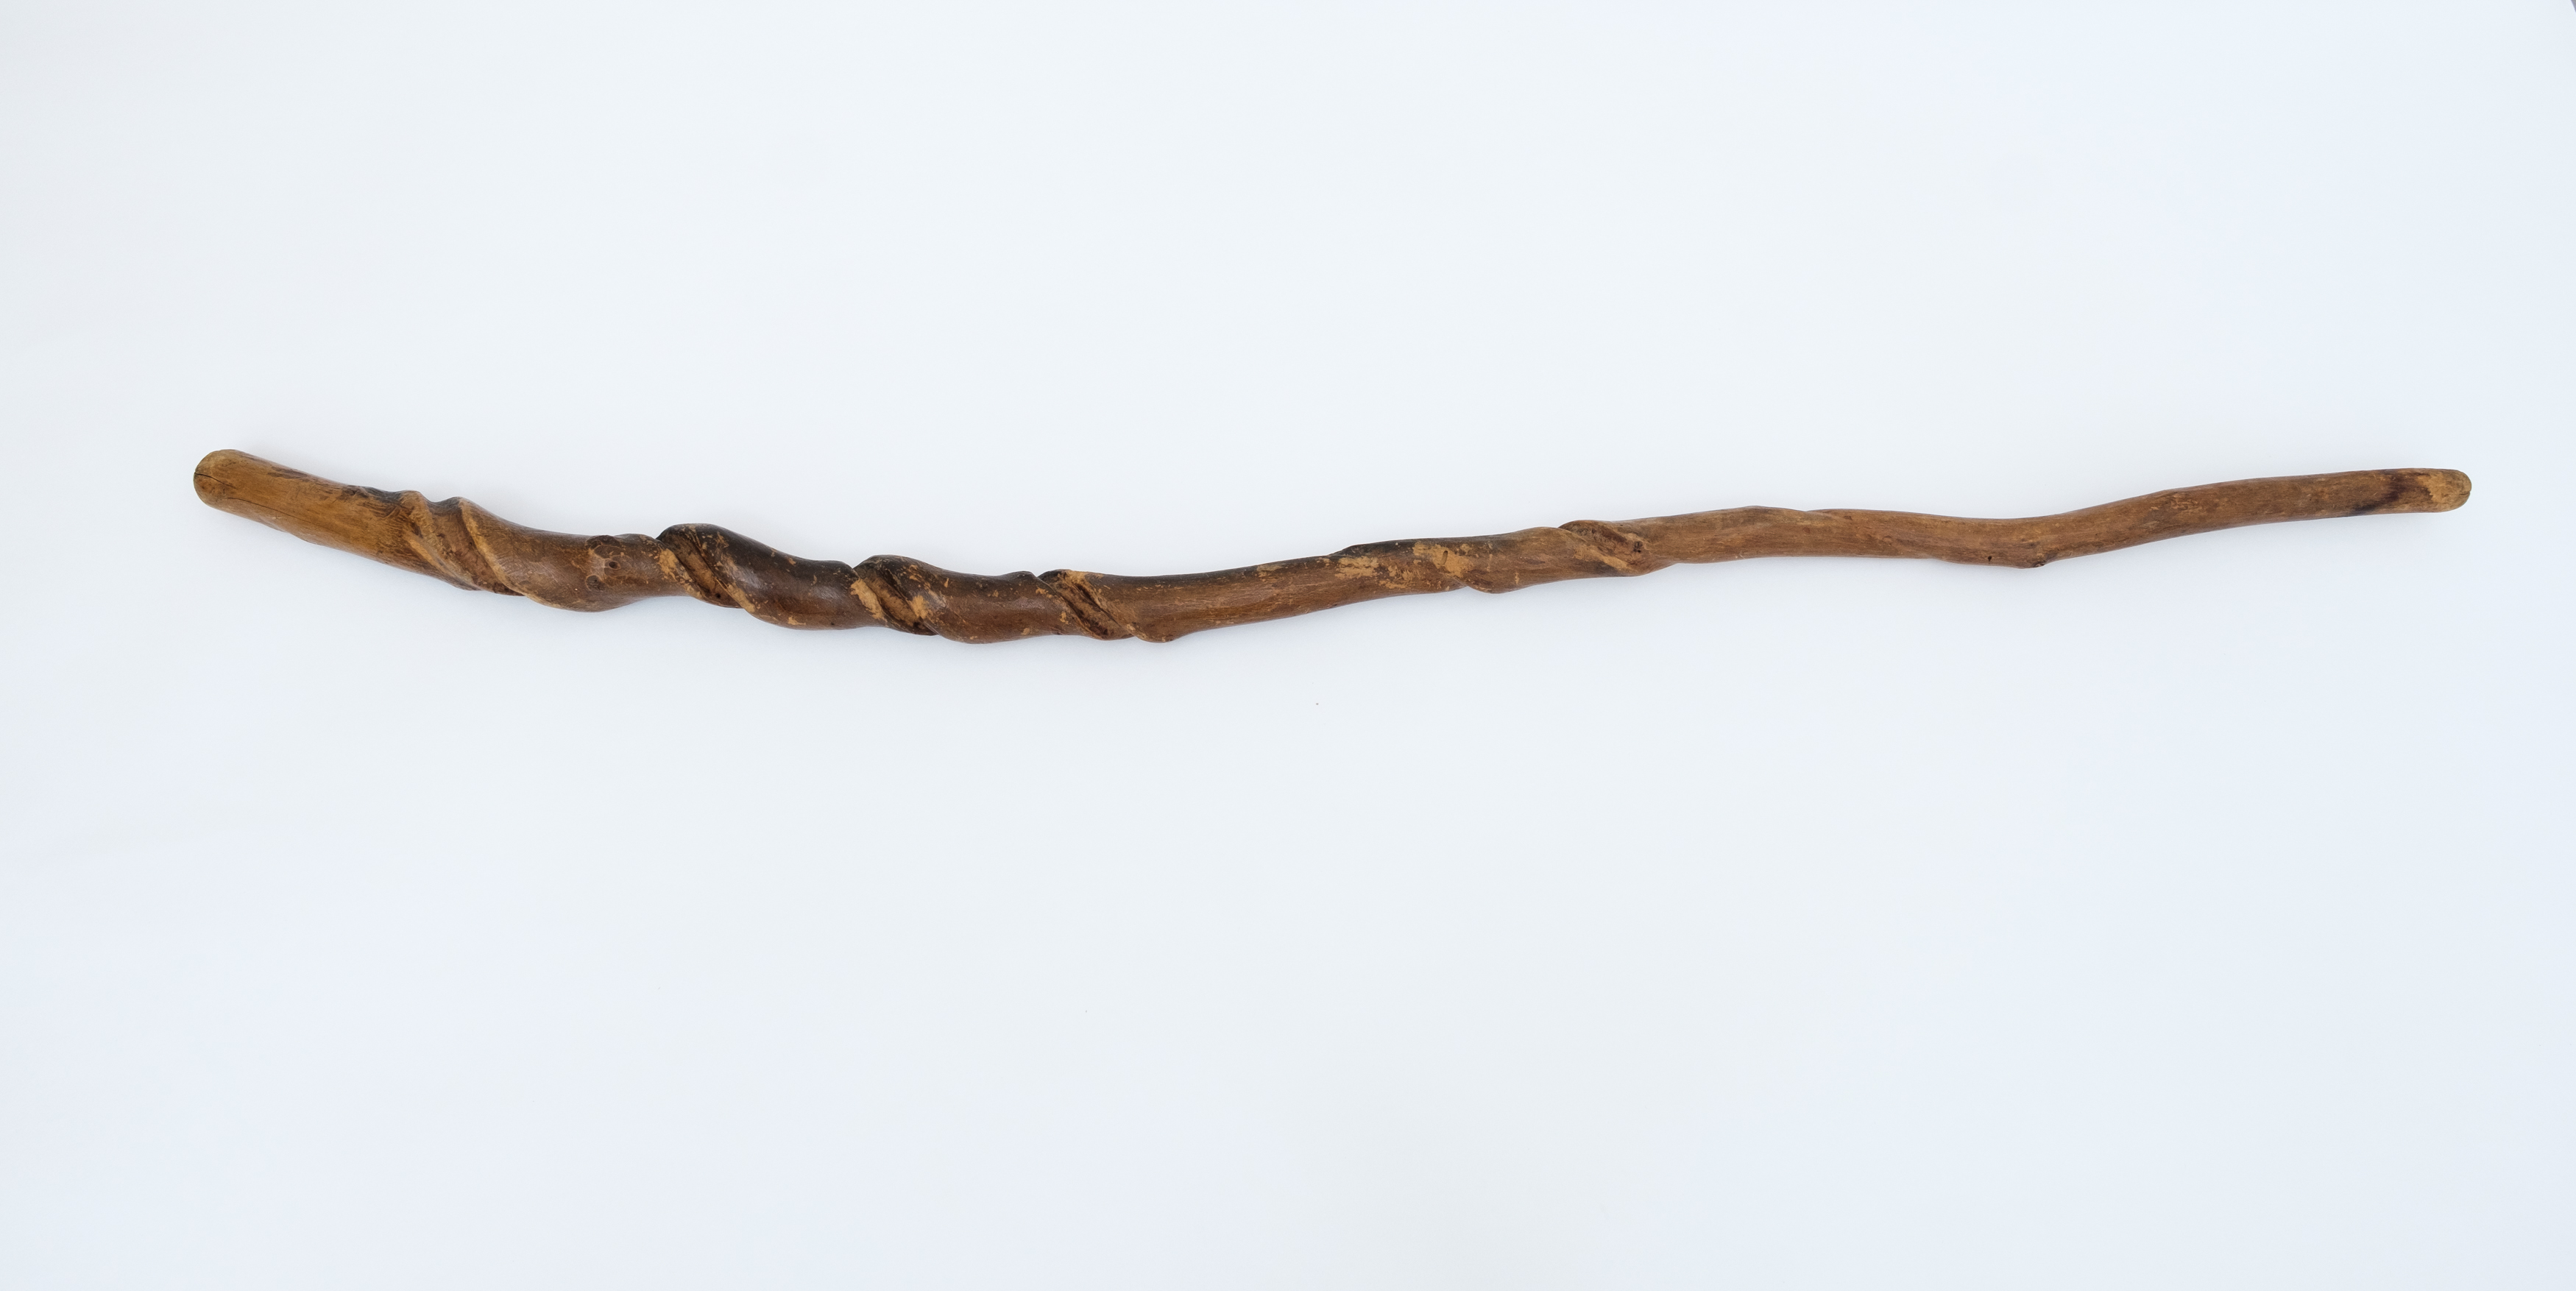 One of the objects Stewart investigates: a walking stick crafted by an enslaved man in the eighteenth century